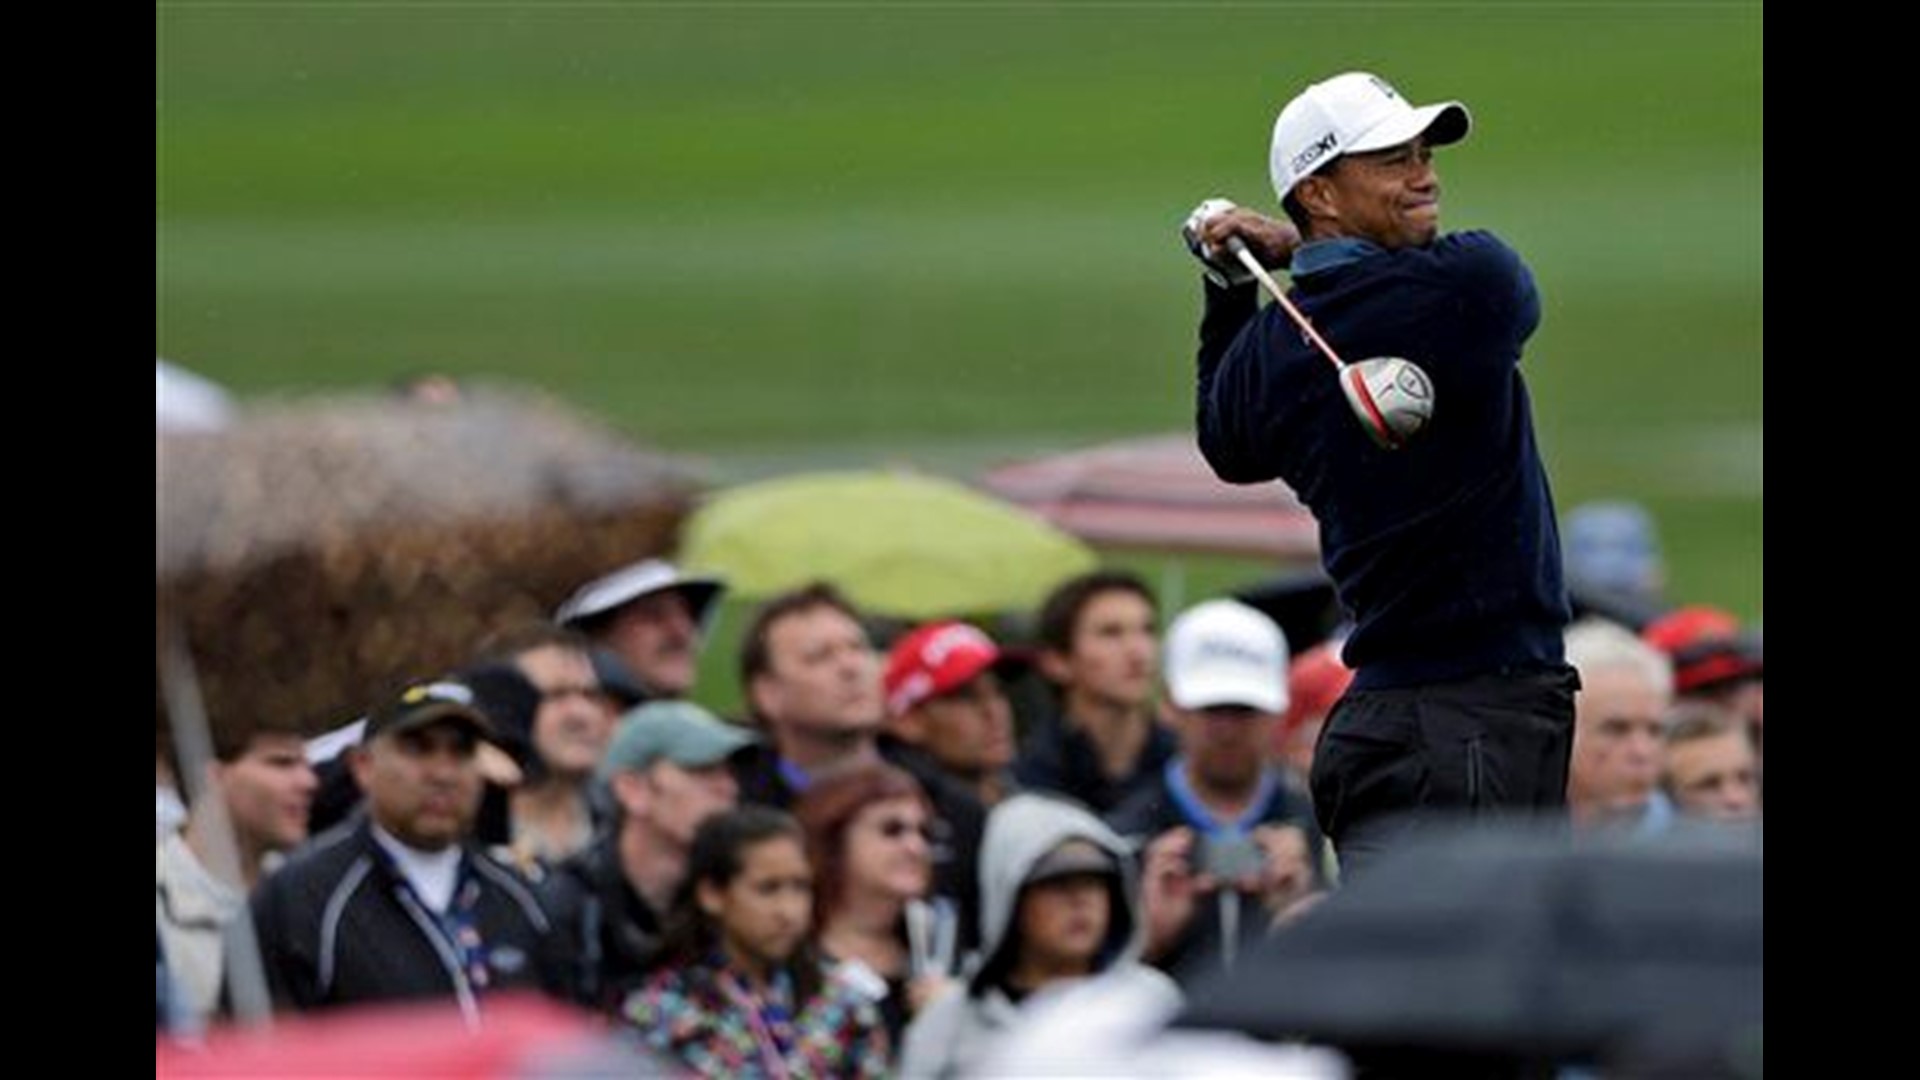 Woods atop the leaderboard at Torrey Pines